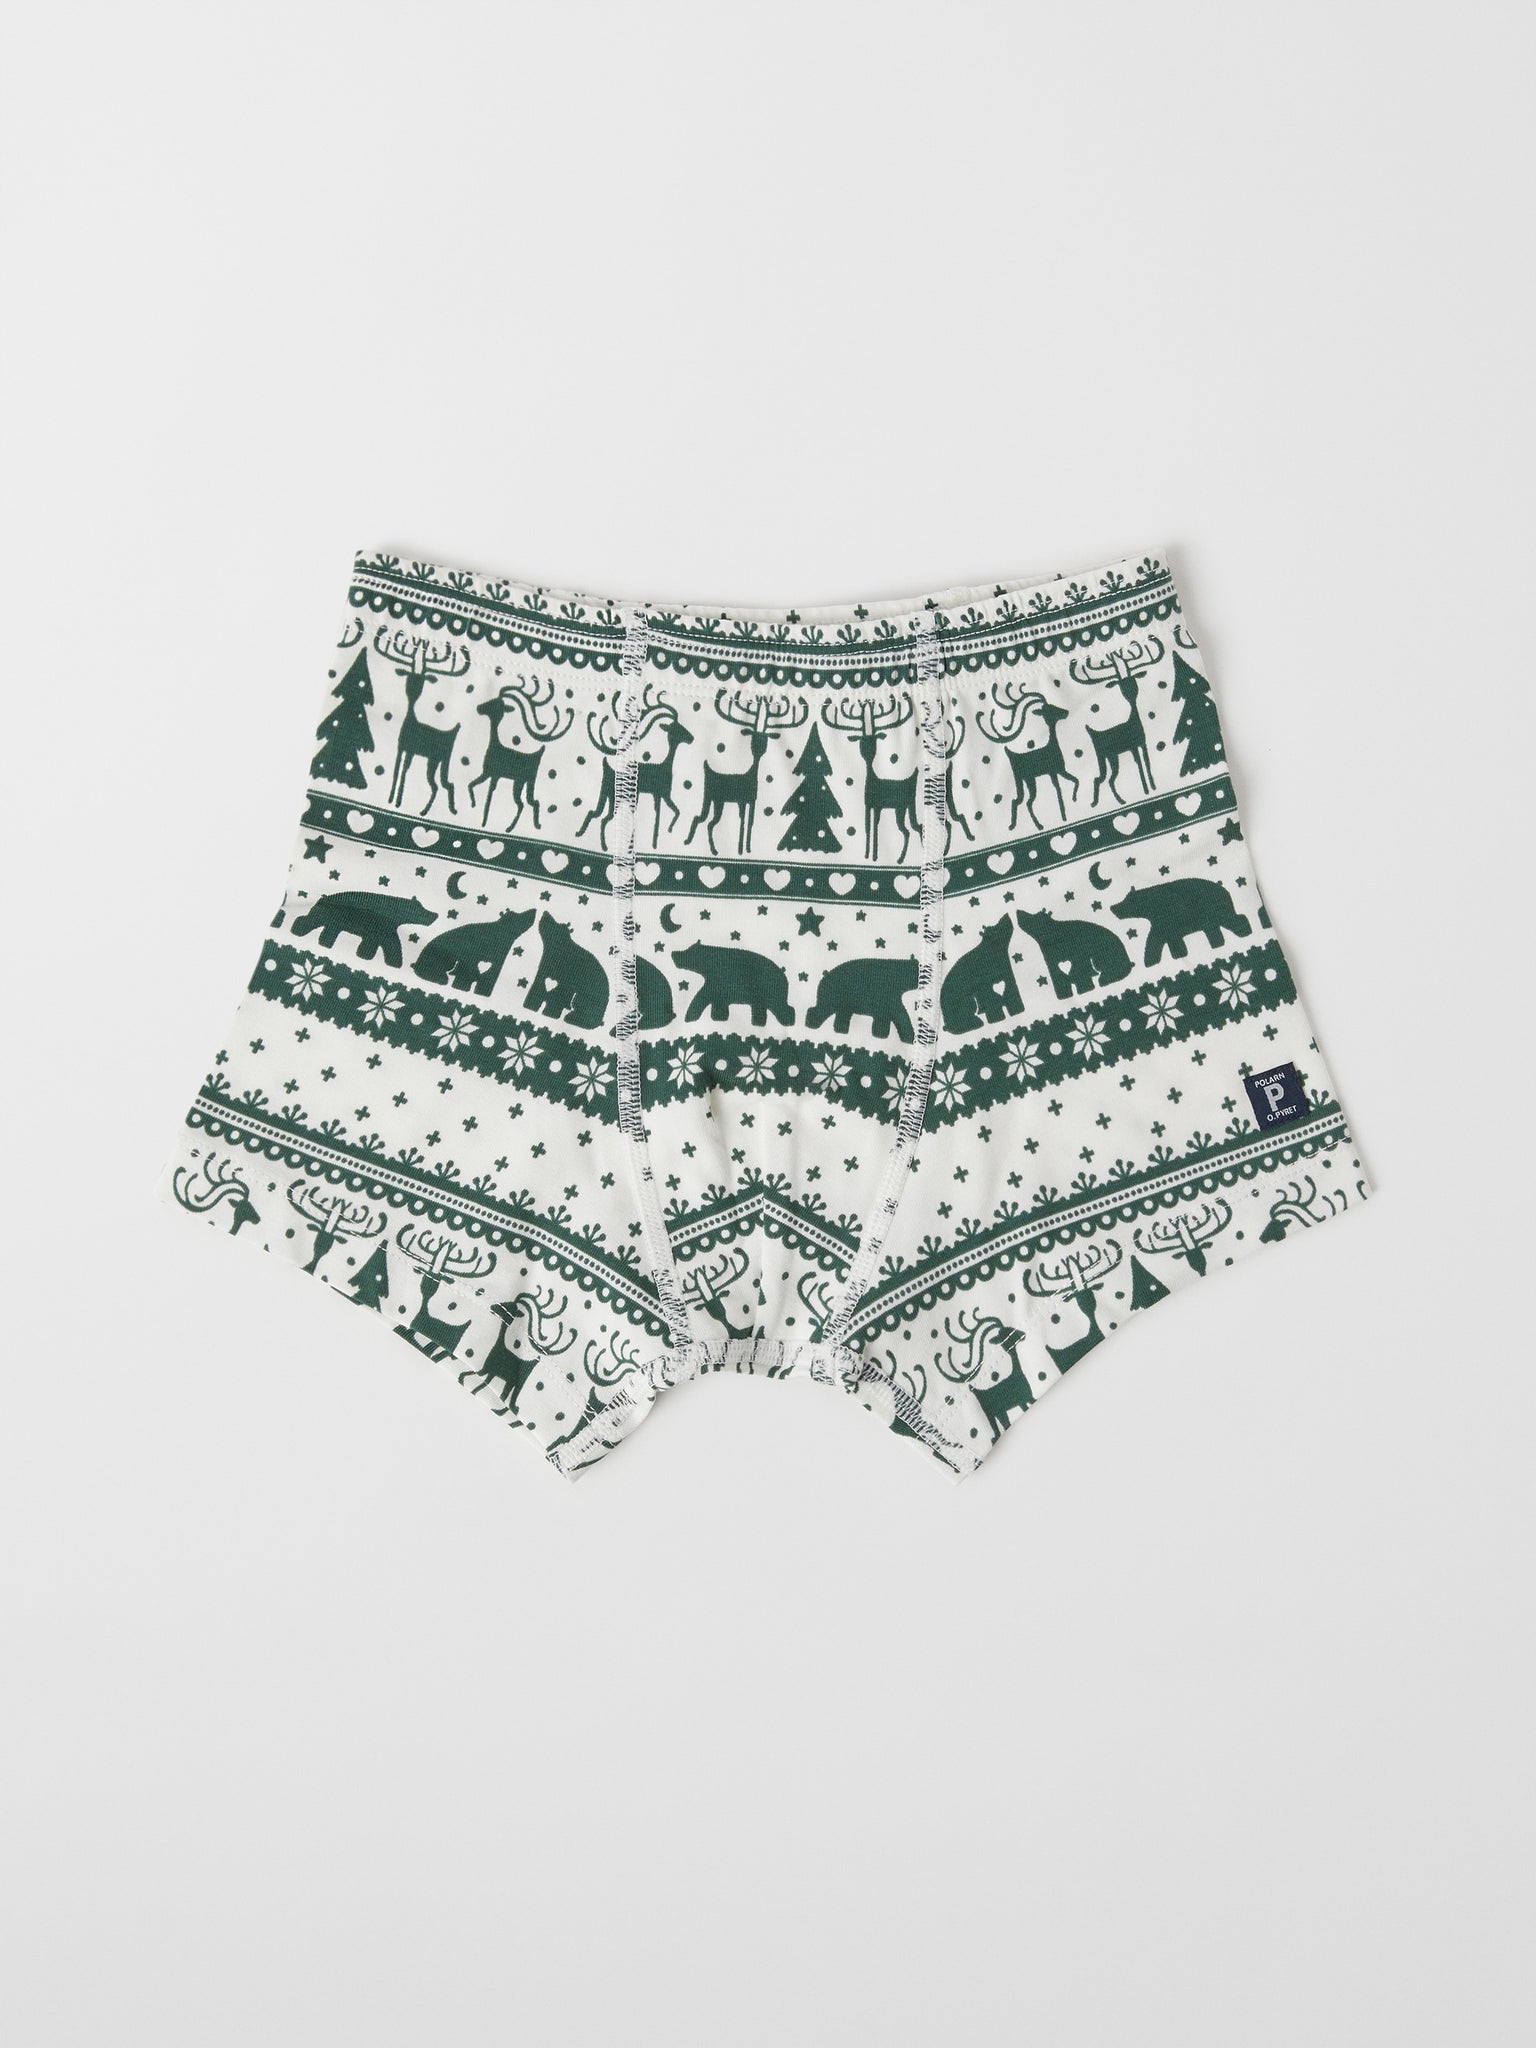 Boys Navy Organic Cotton Boxers from the Polarn O. Pyret kidswear collection. Ethically produced kids clothing.